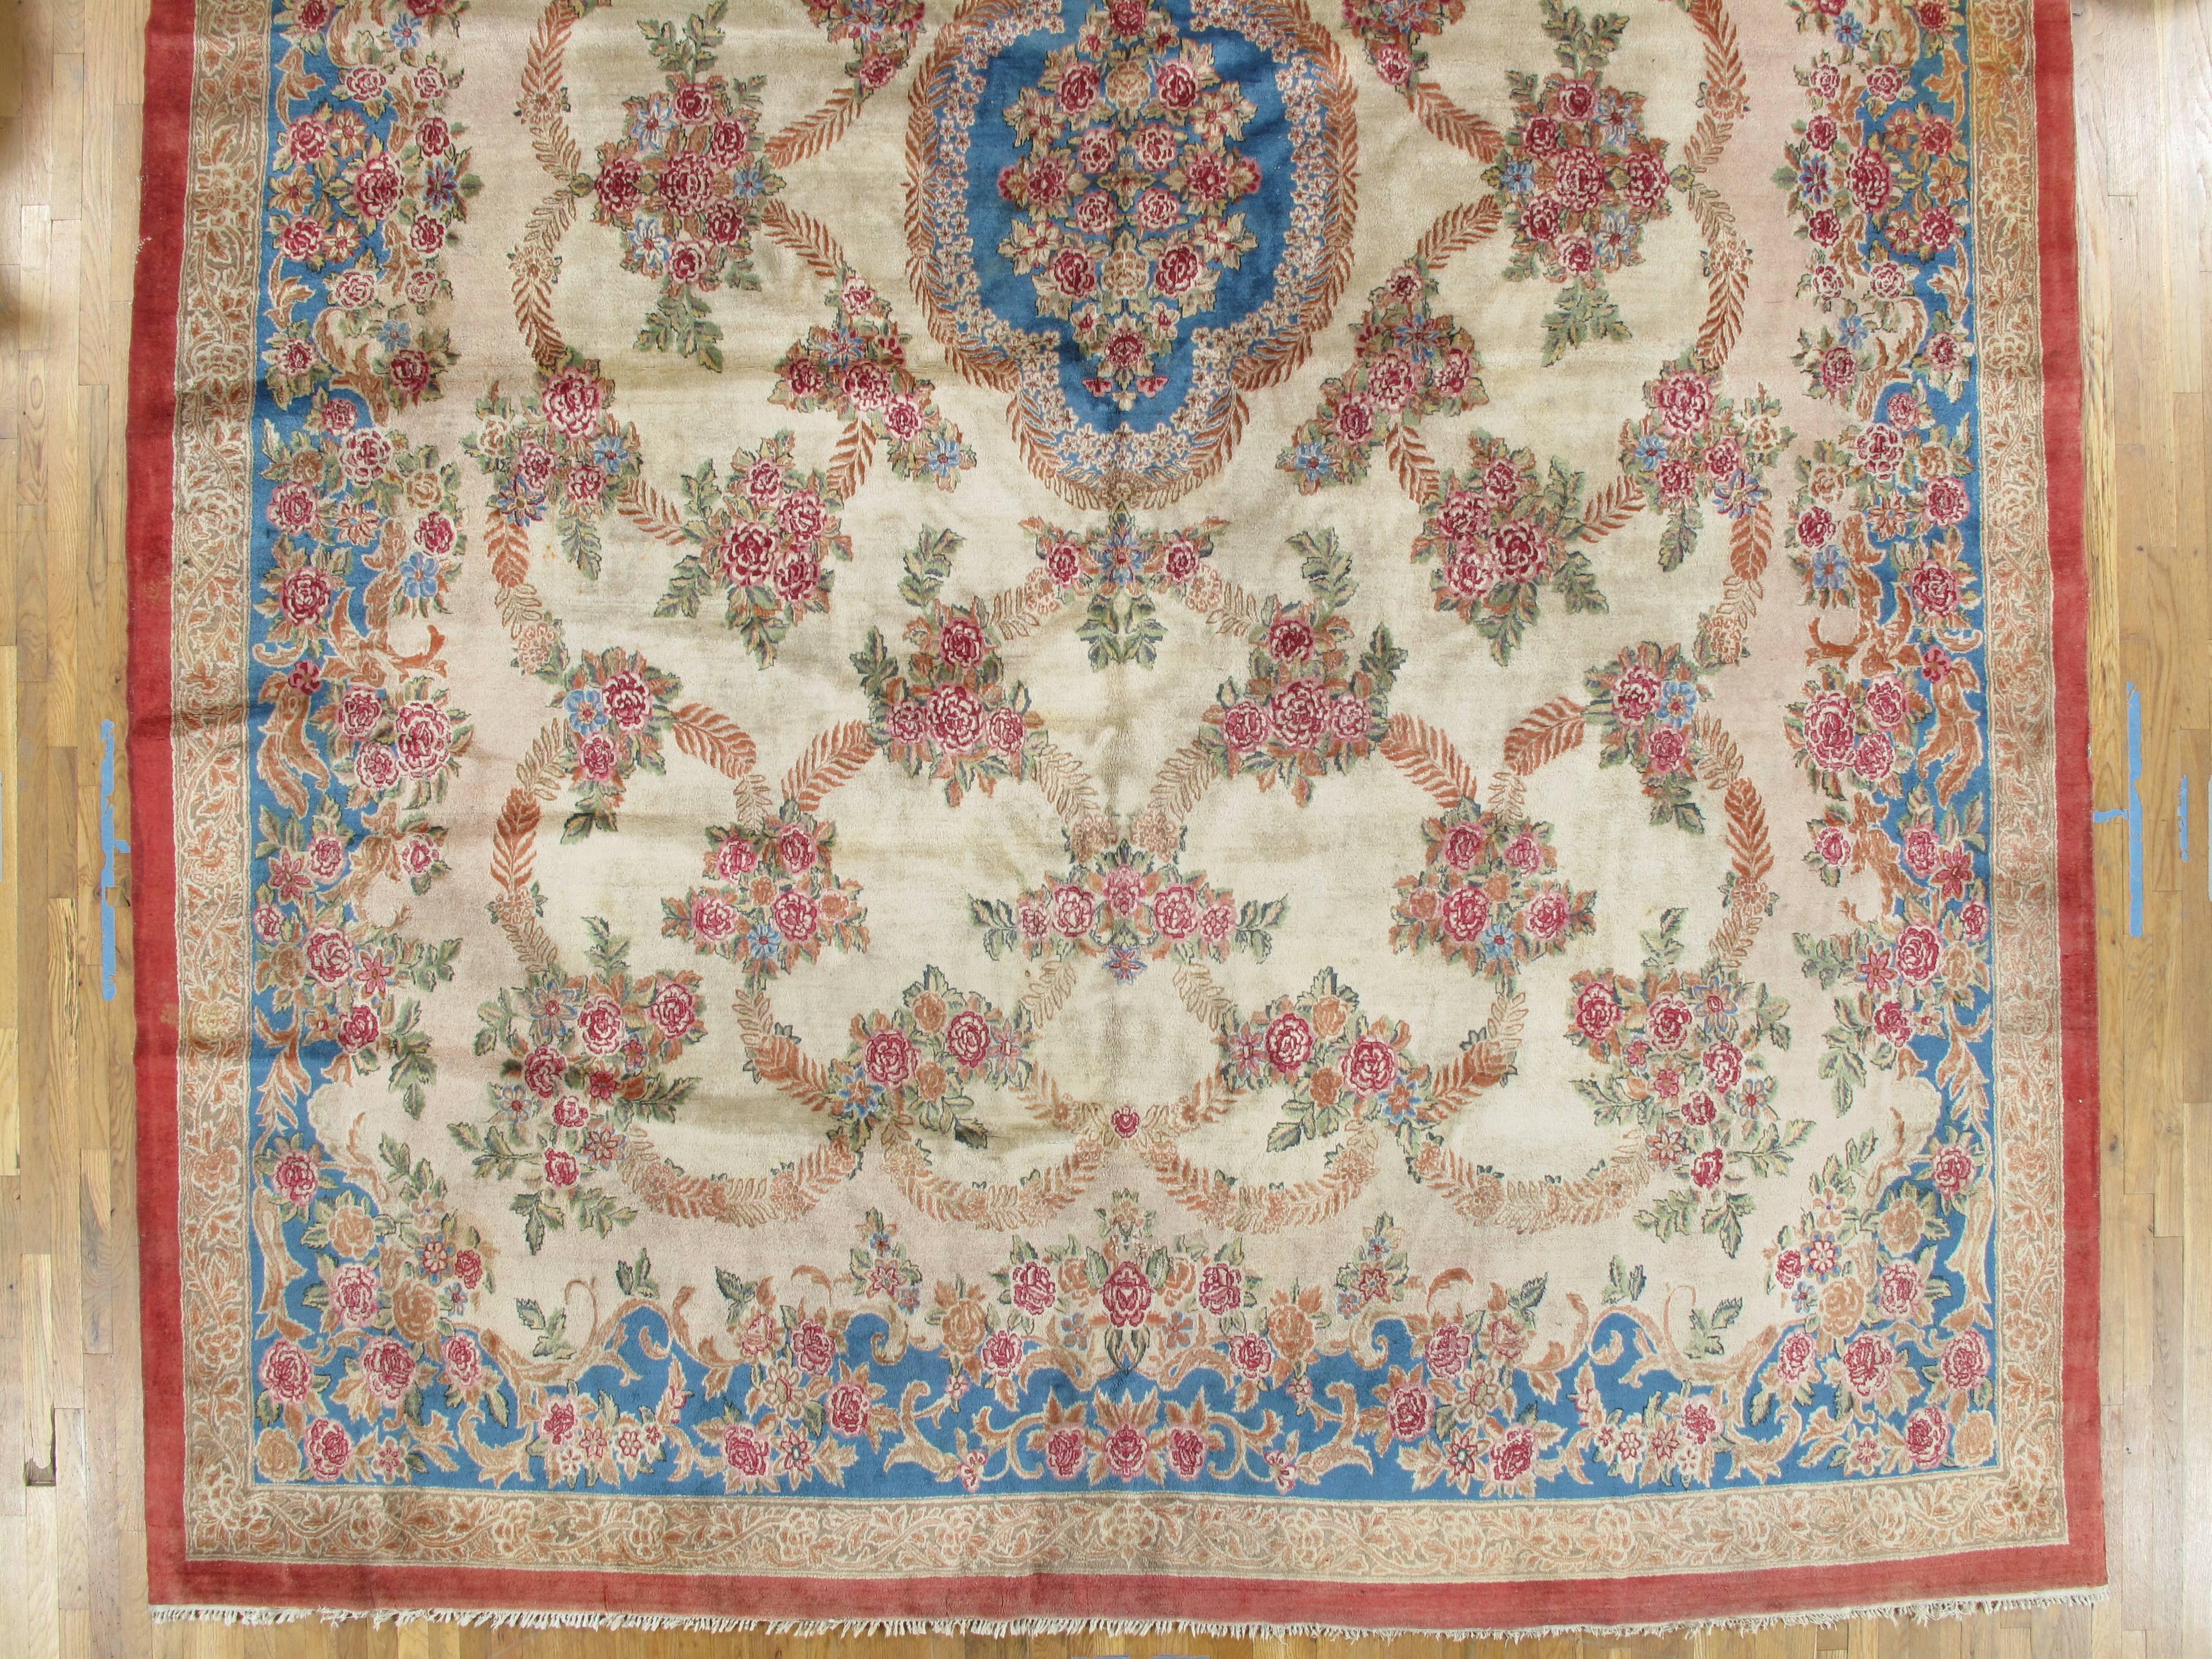 Hand-Knotted Antique Kerman Carpet, Handmade Persian Rug, Wool Carpet, Pink Red, Green, Ivory For Sale